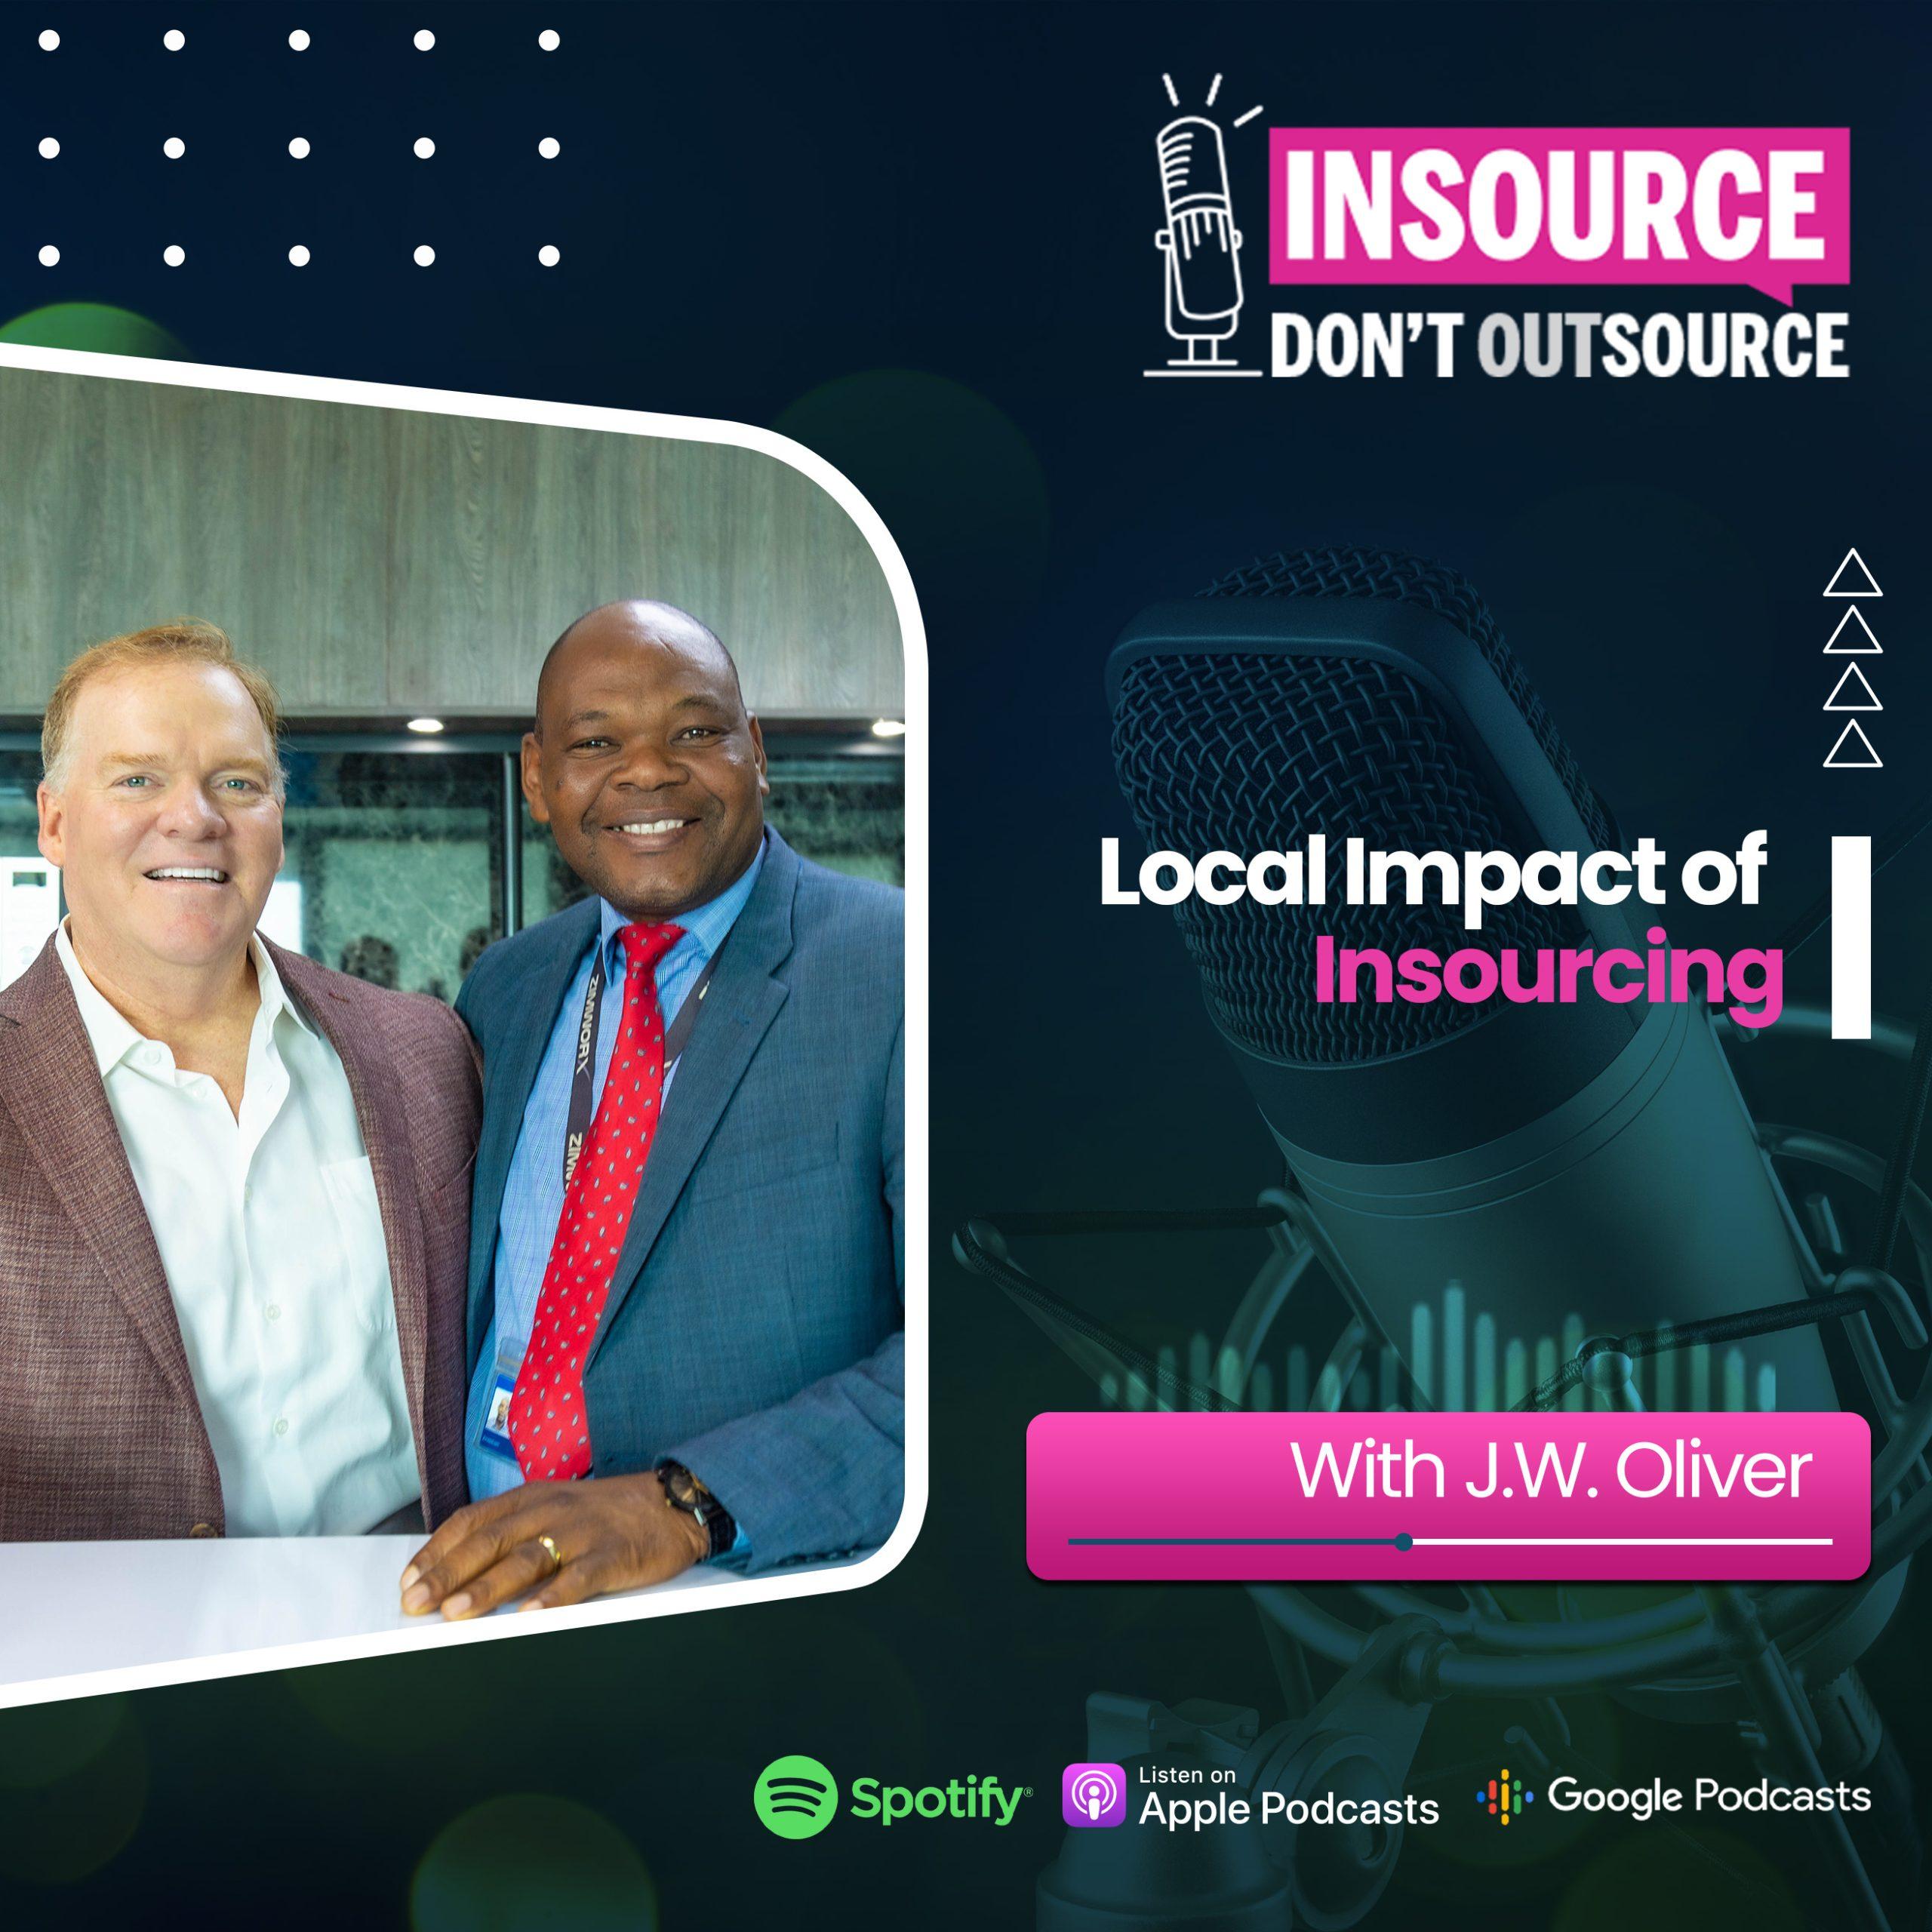 Local Impact of Insourcing